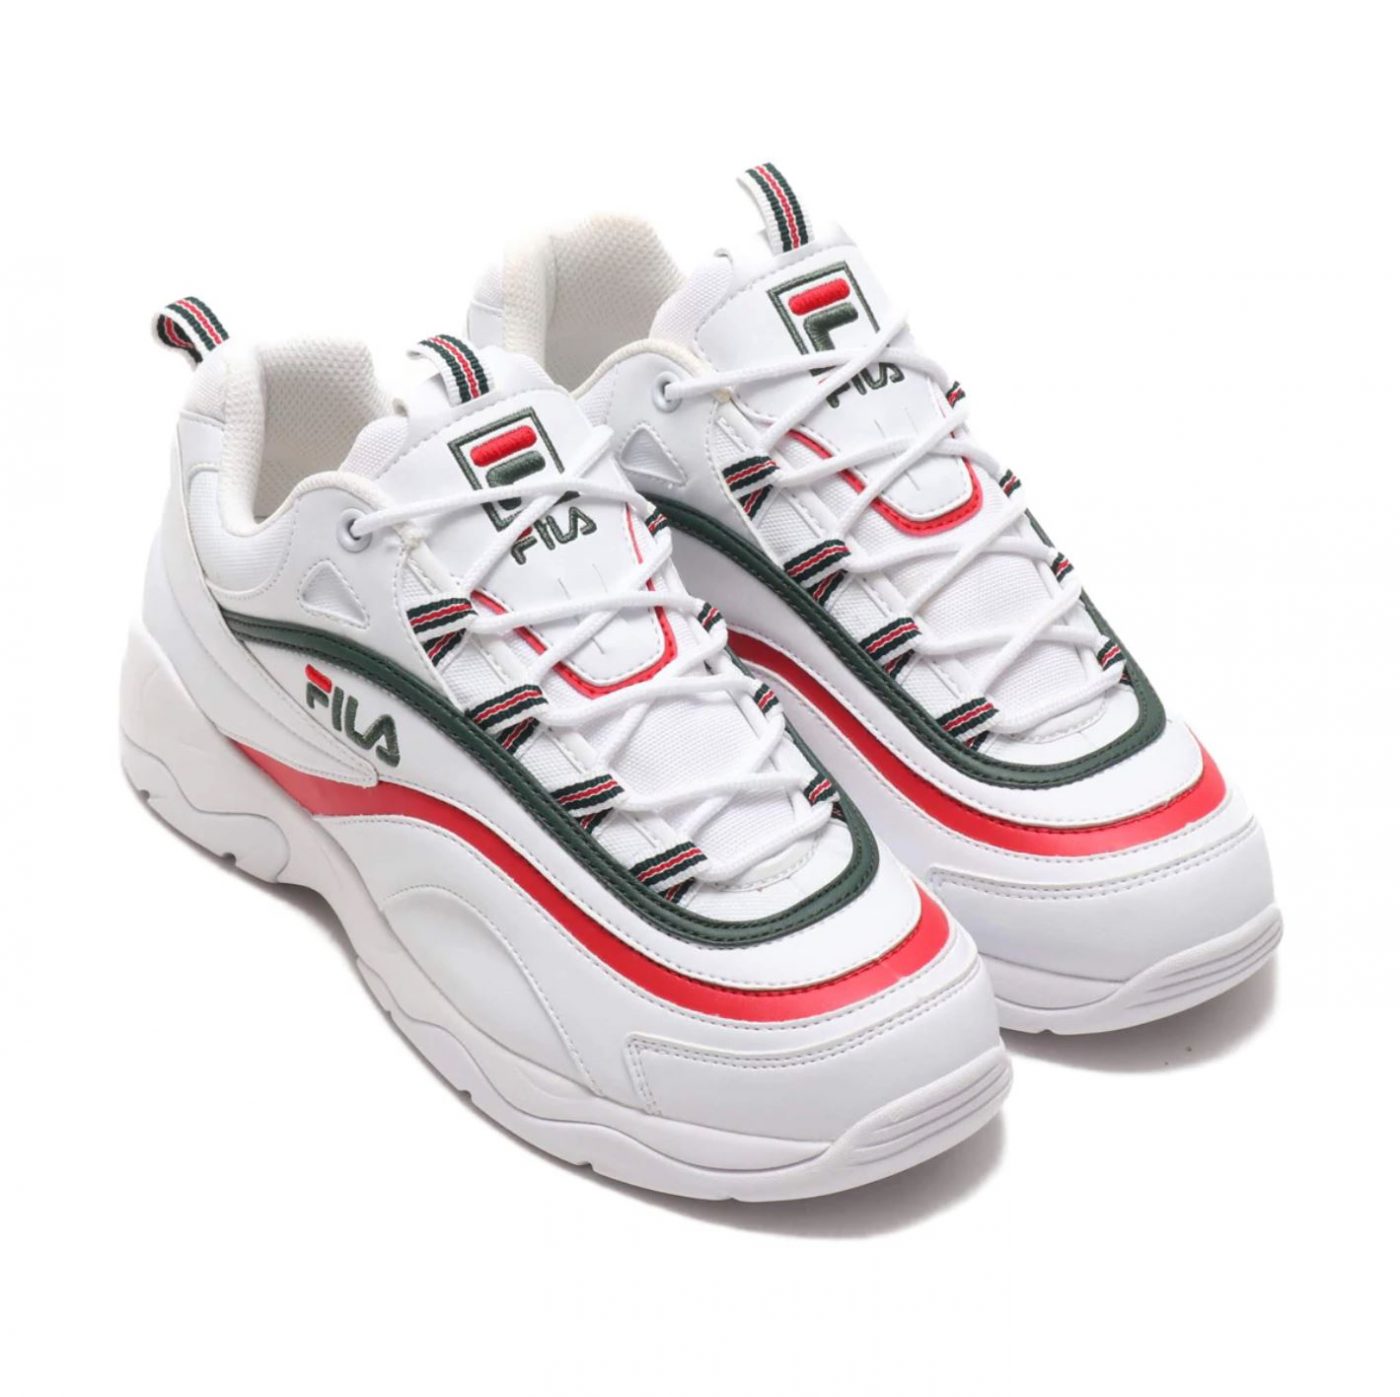 FILA RAY WH SYCA FR atmos exclusive-03